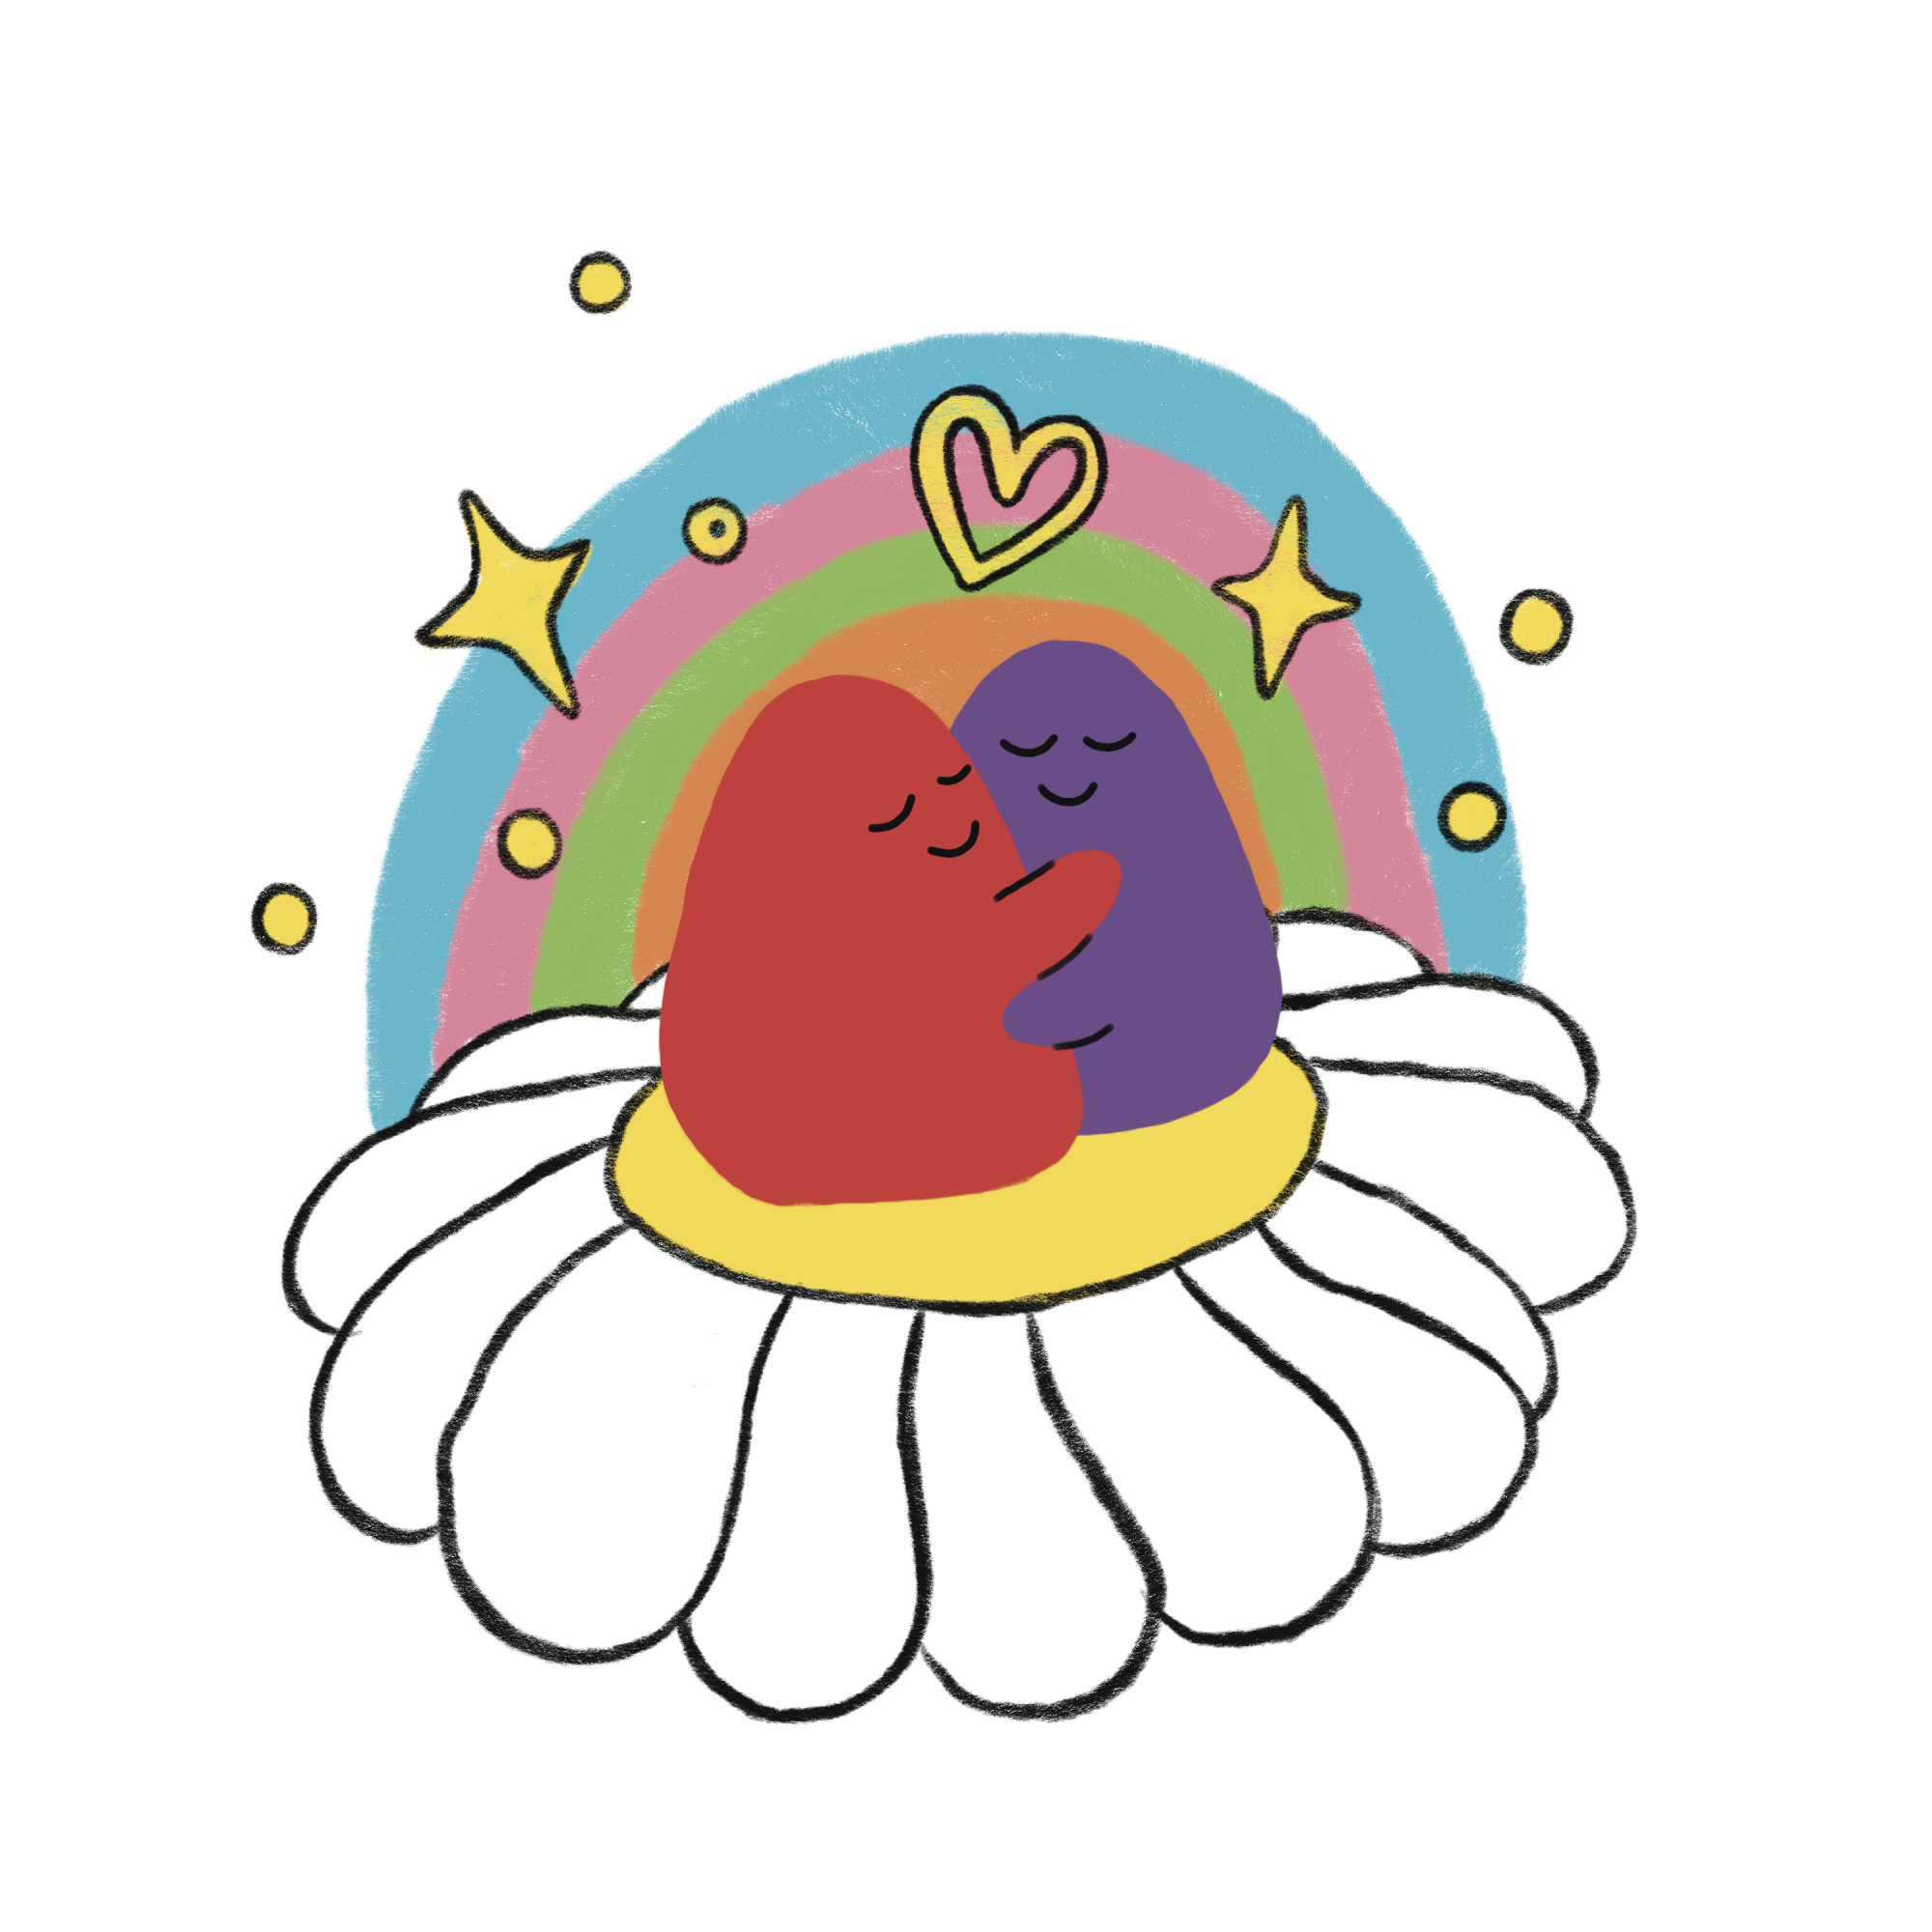 An illustration of two blobs hugging on top of a flower